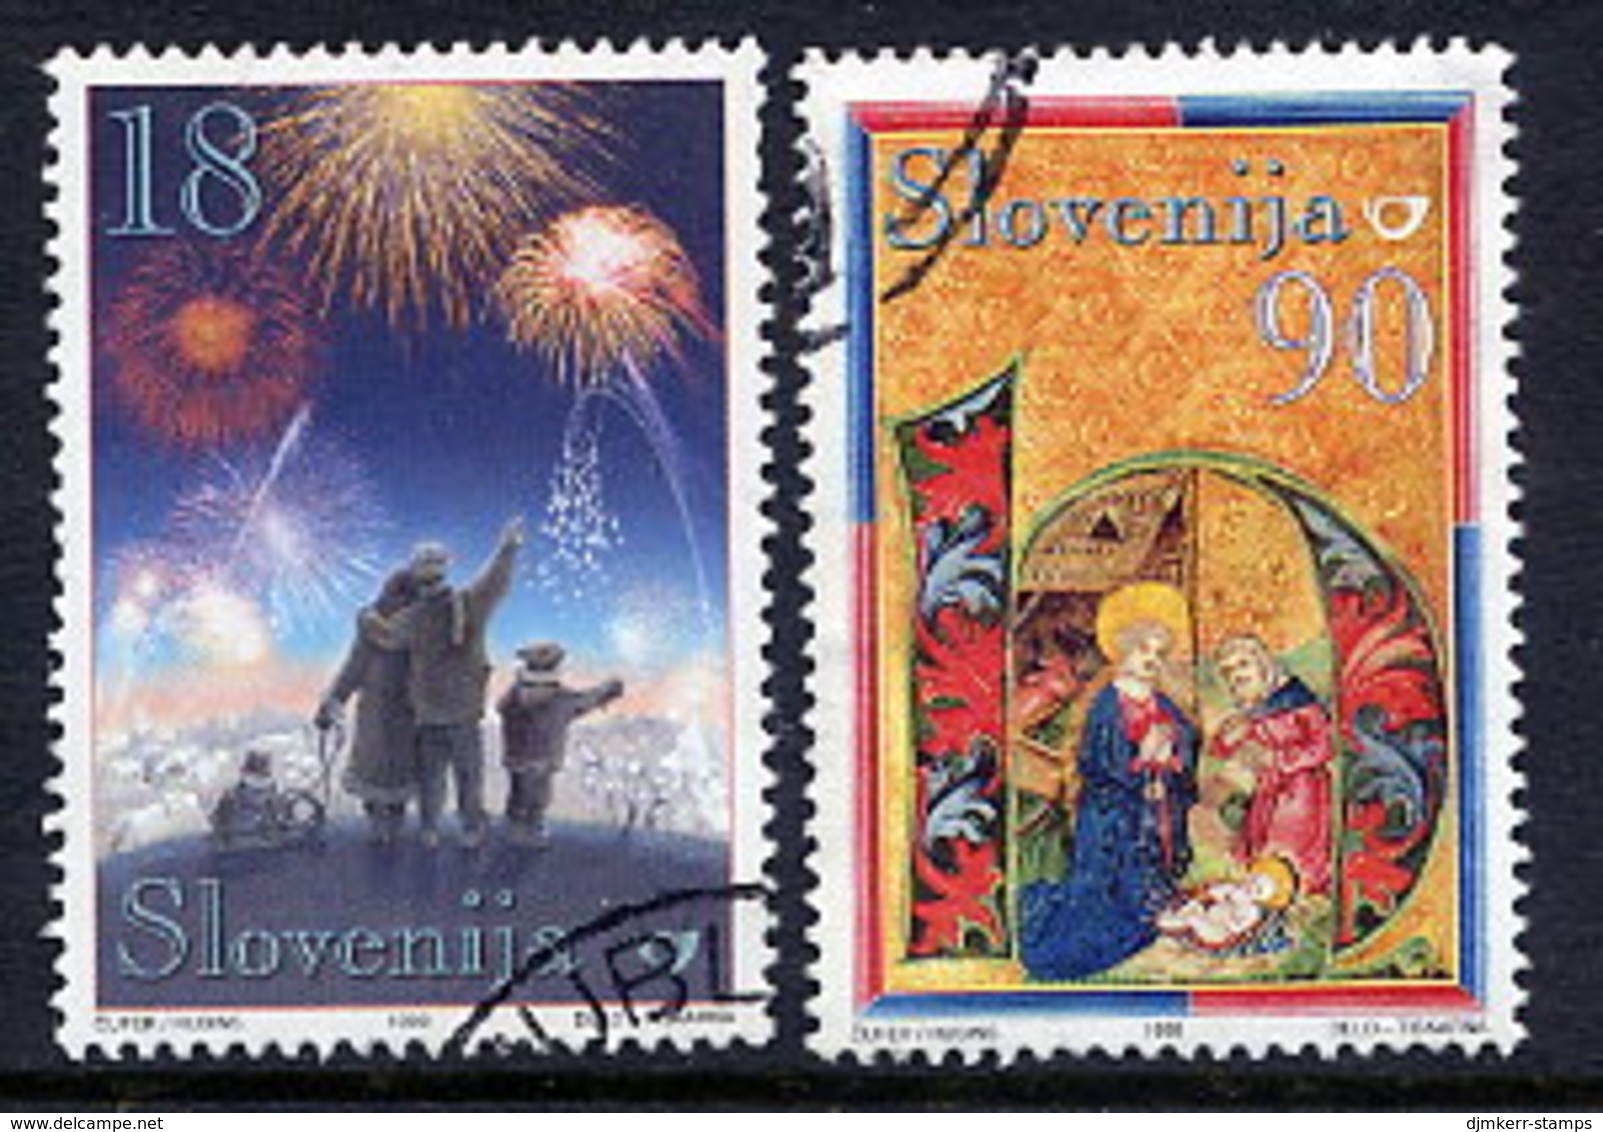 SLOVENIA 1999 Christmas 18 T. And 90 T. From Sheets Used.  Michel 277, 279 - Slowenien